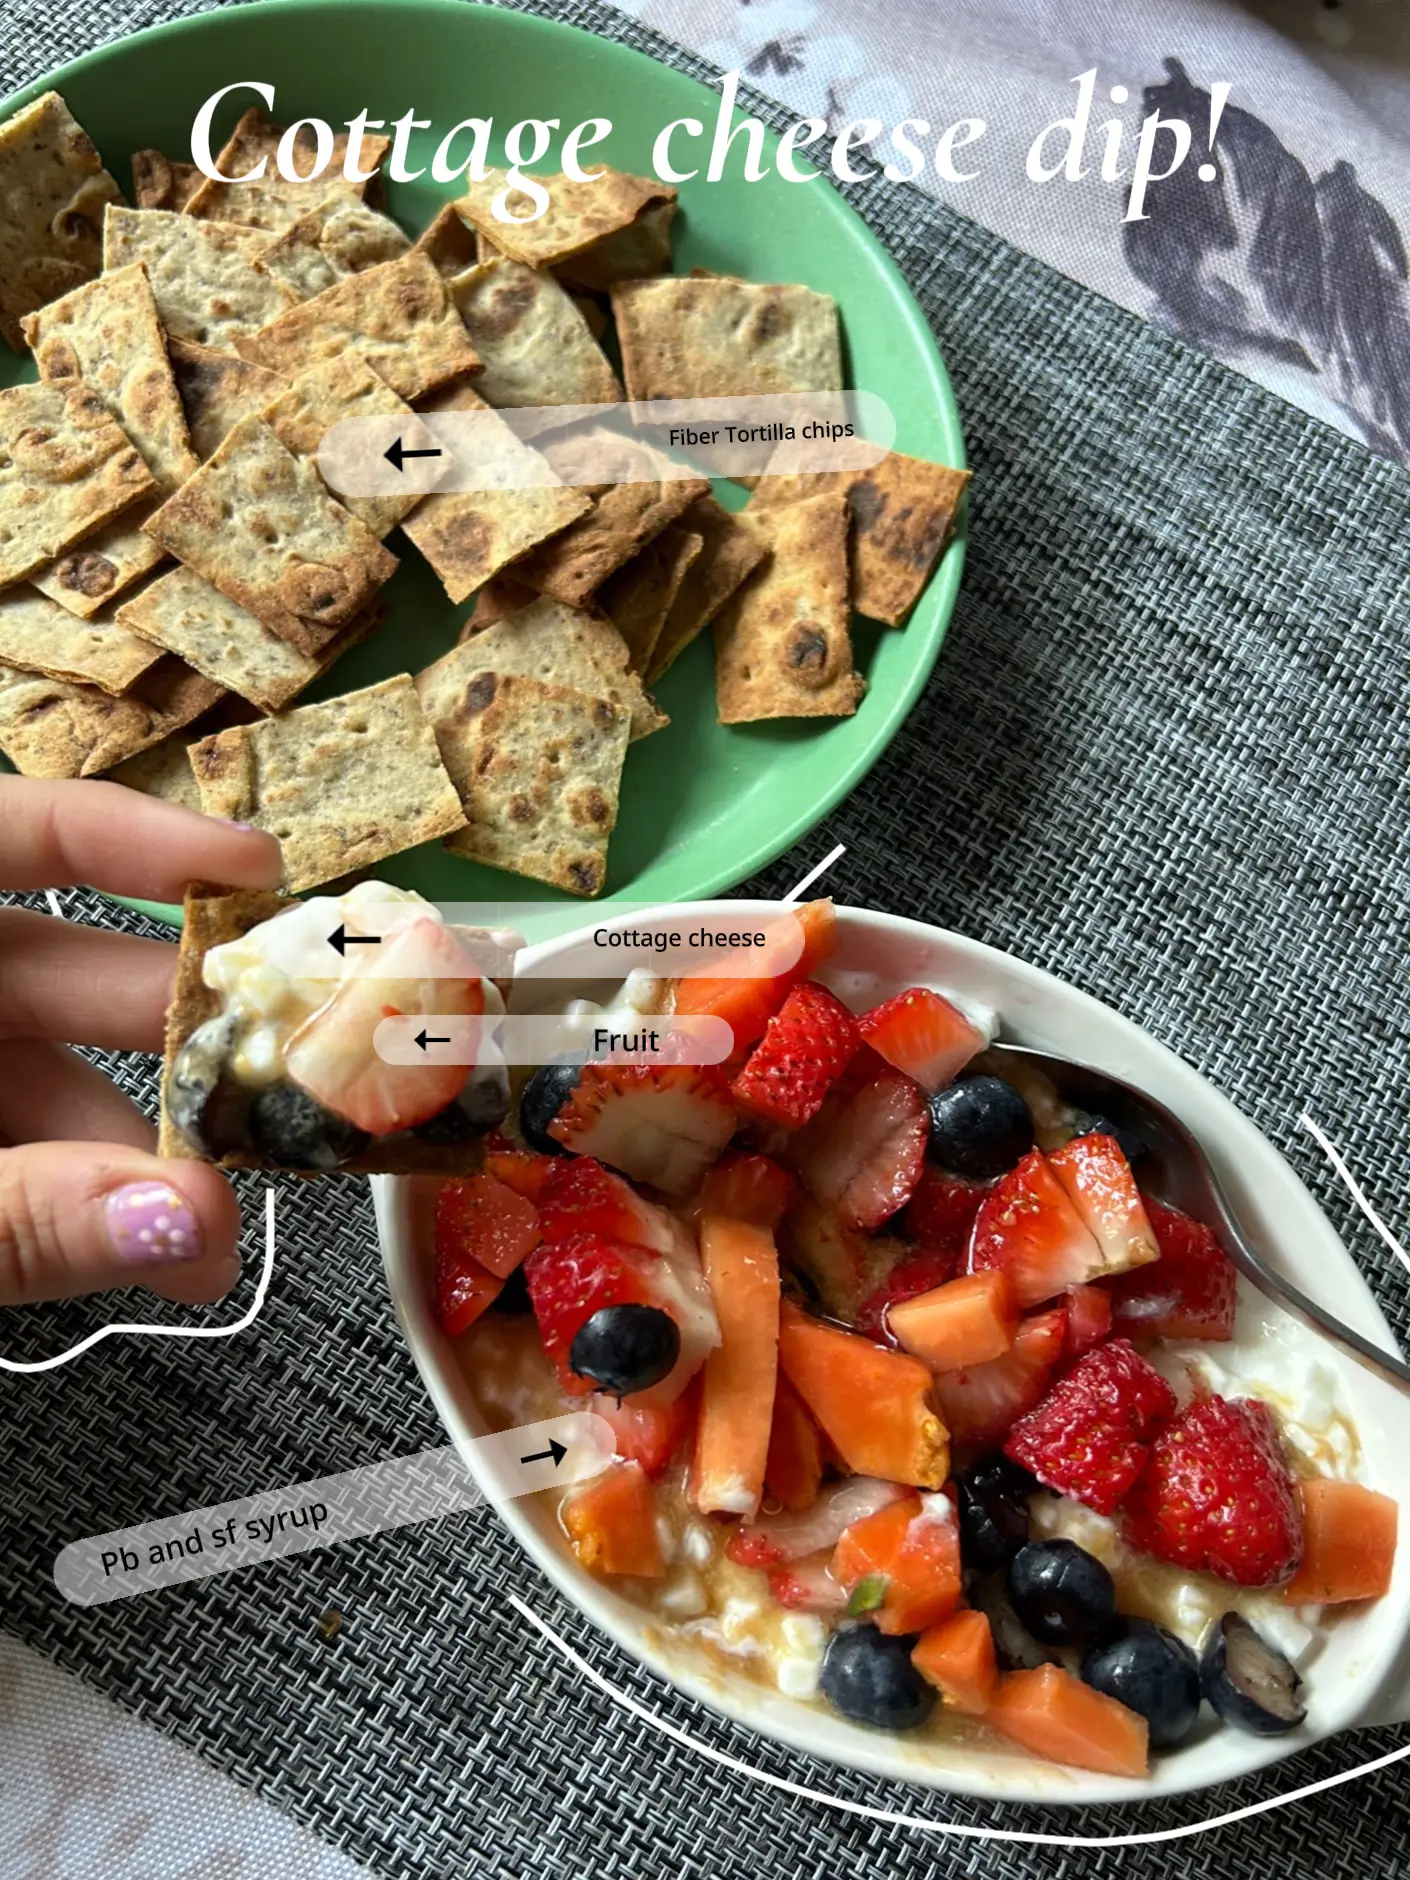 Has the Cottage Cheese Trend Gone Too Far? This Viral Dip Has Us